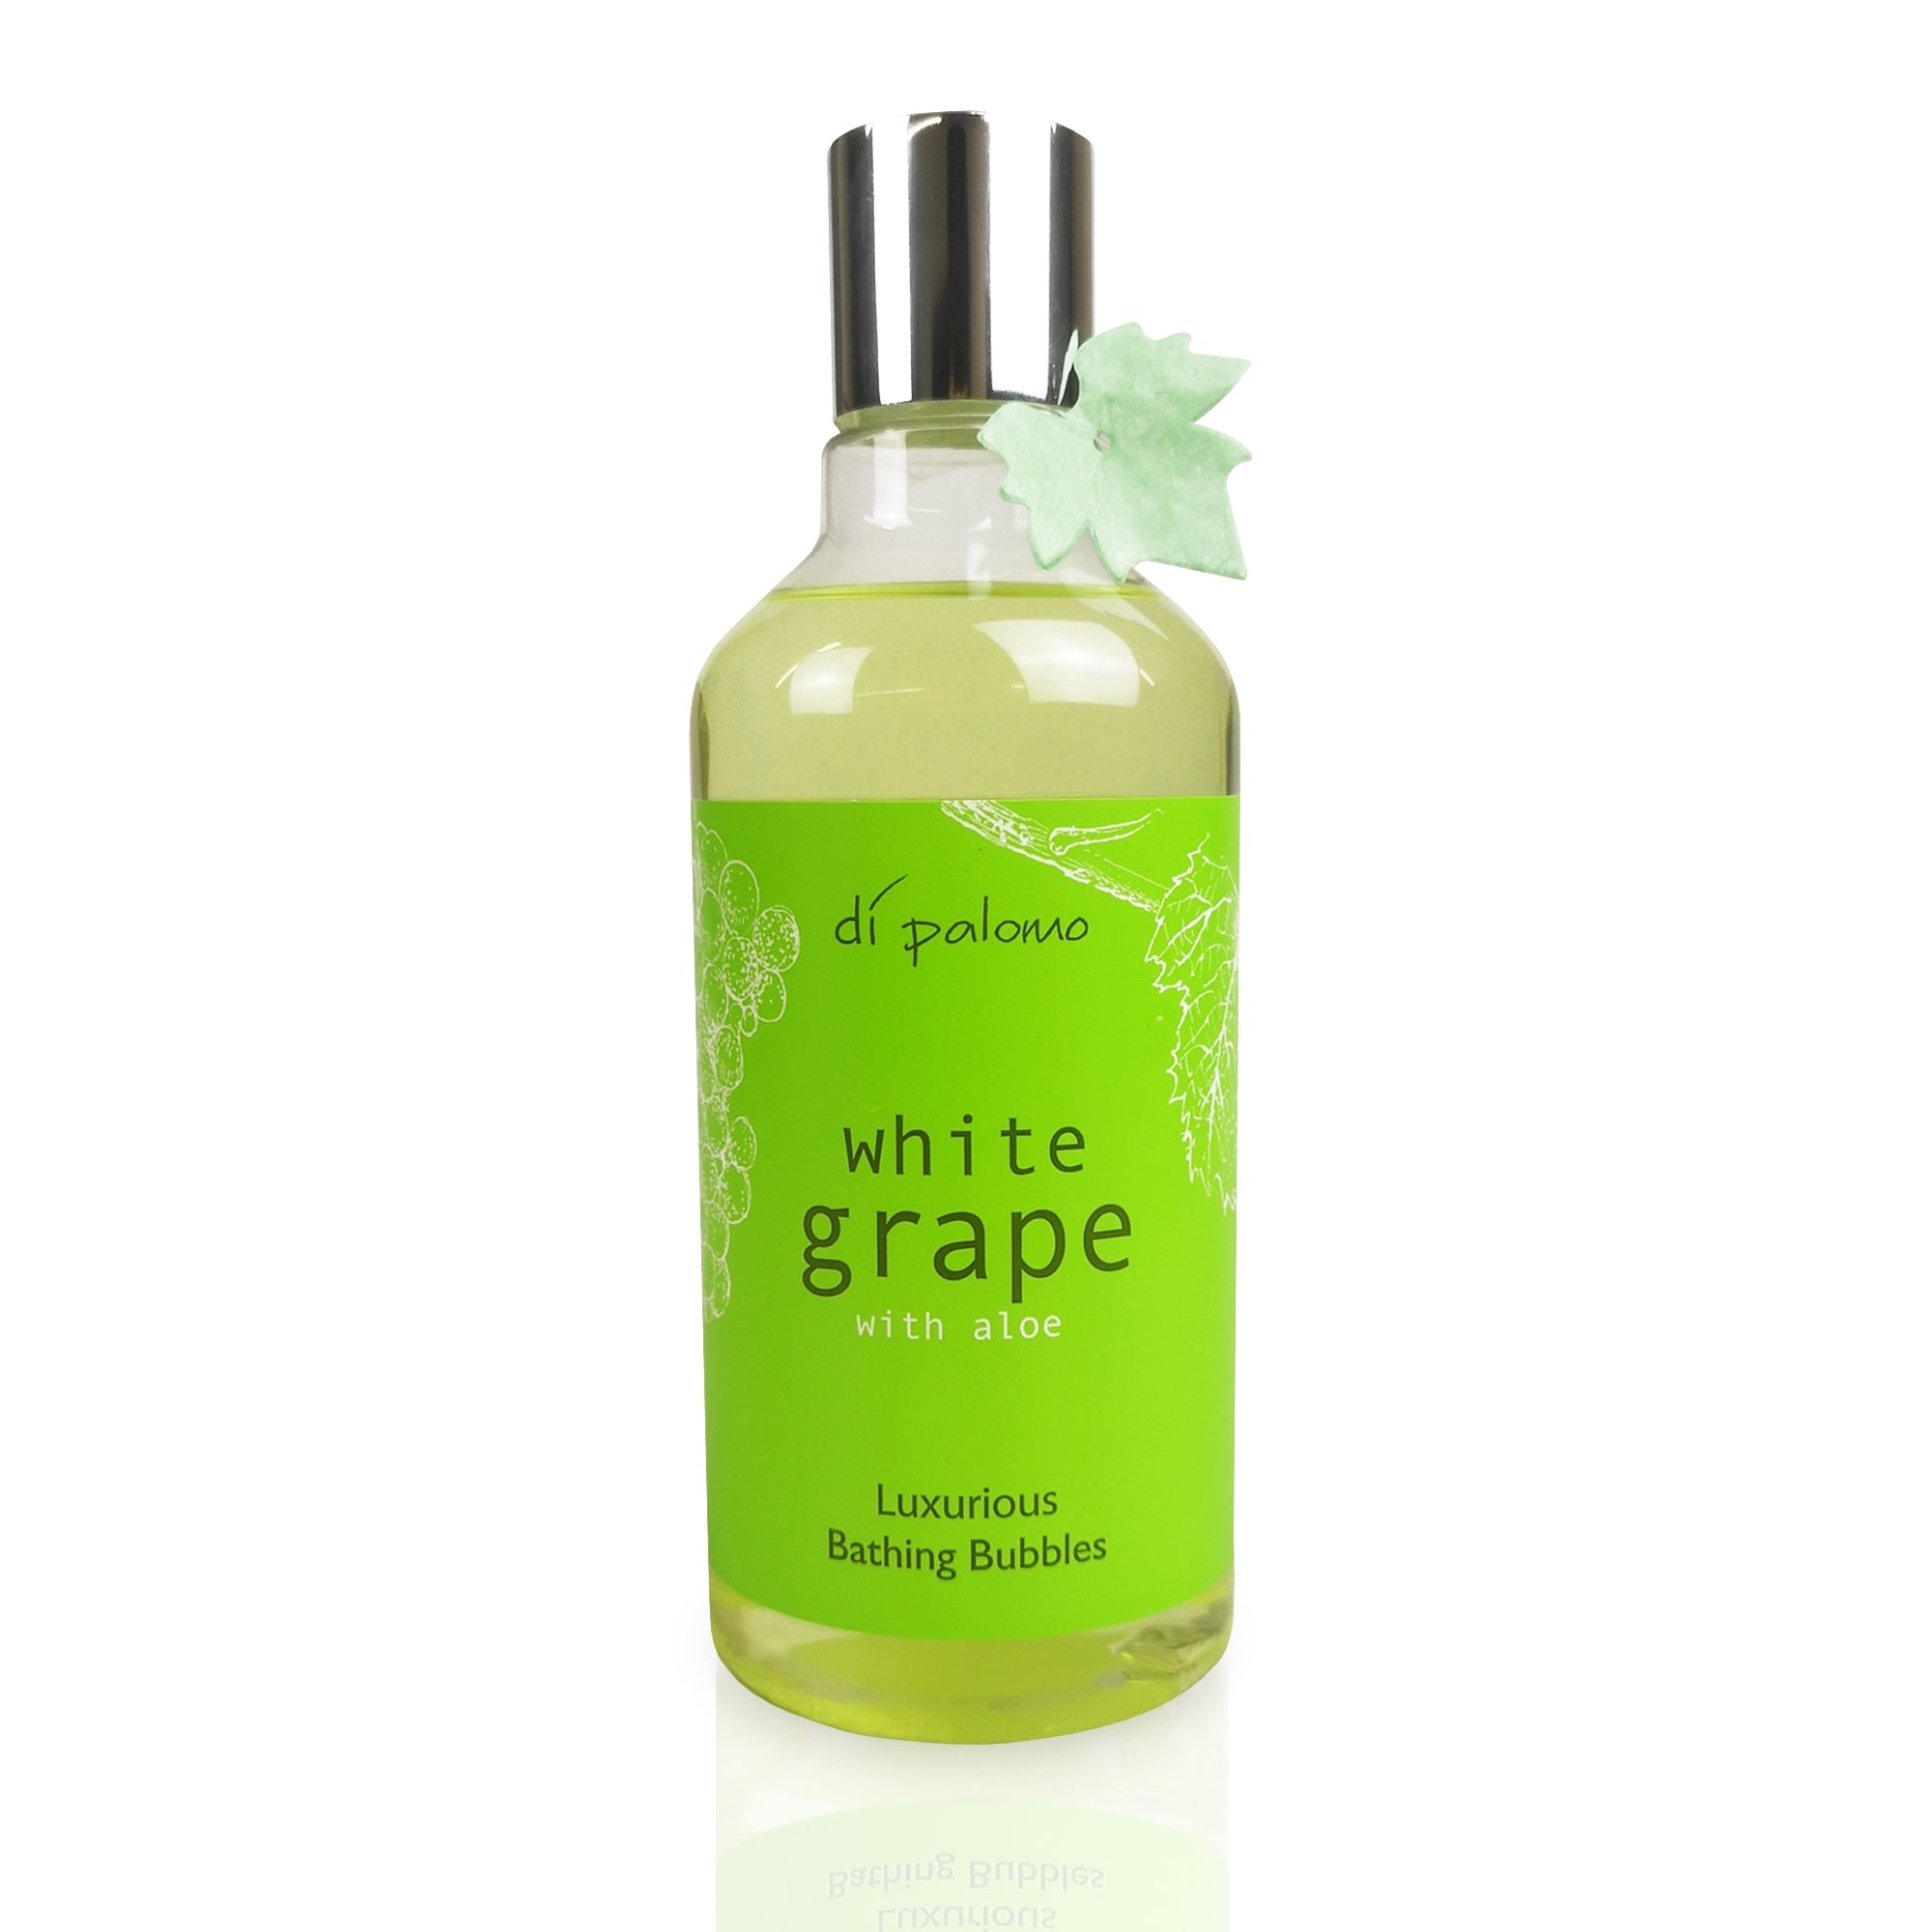 A rich, foaming bubble bath fragranced with White Grape & Aloe. blended using the finest ingredients.

Gently cleanse your skin as you relax in a mountain of luxurious bubbles; deliciously fragranced with White Grape & Aloe. For maximum bubbles, pour into warm, running water.